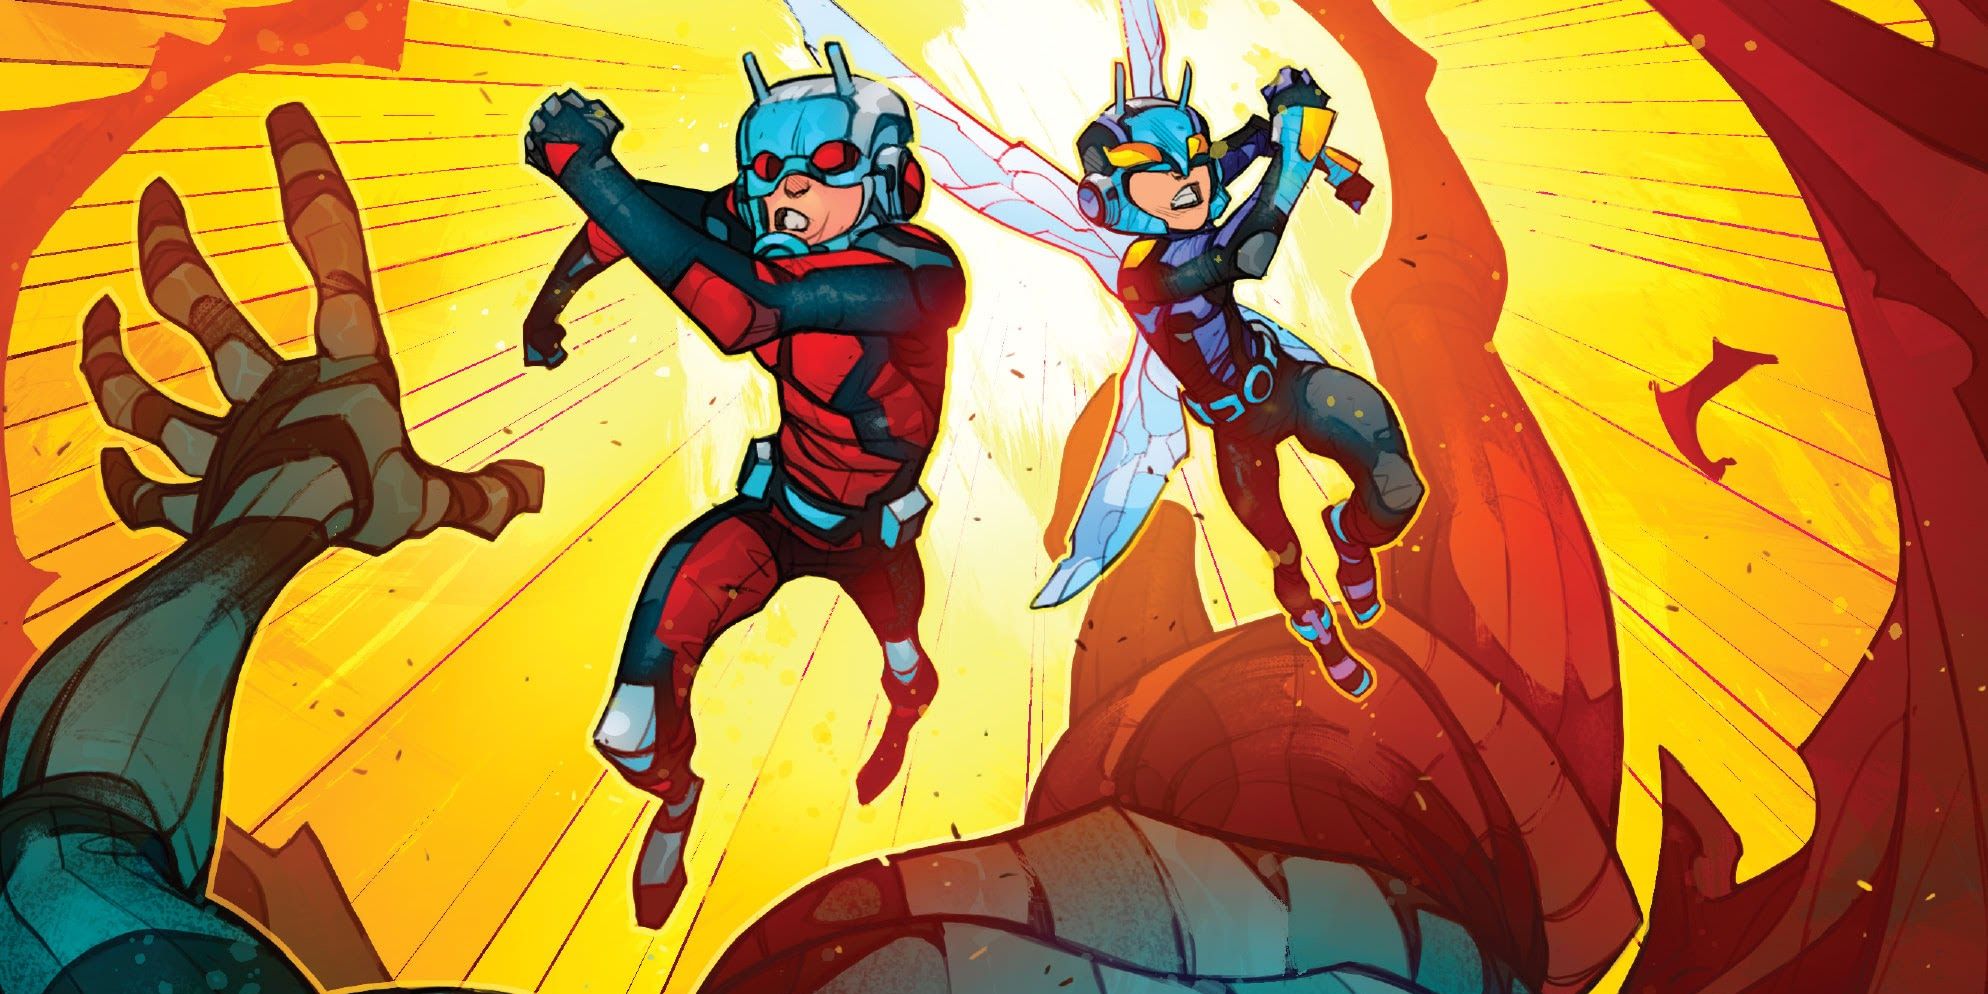 Ant-Man and Wasp adventure in the Savage Land